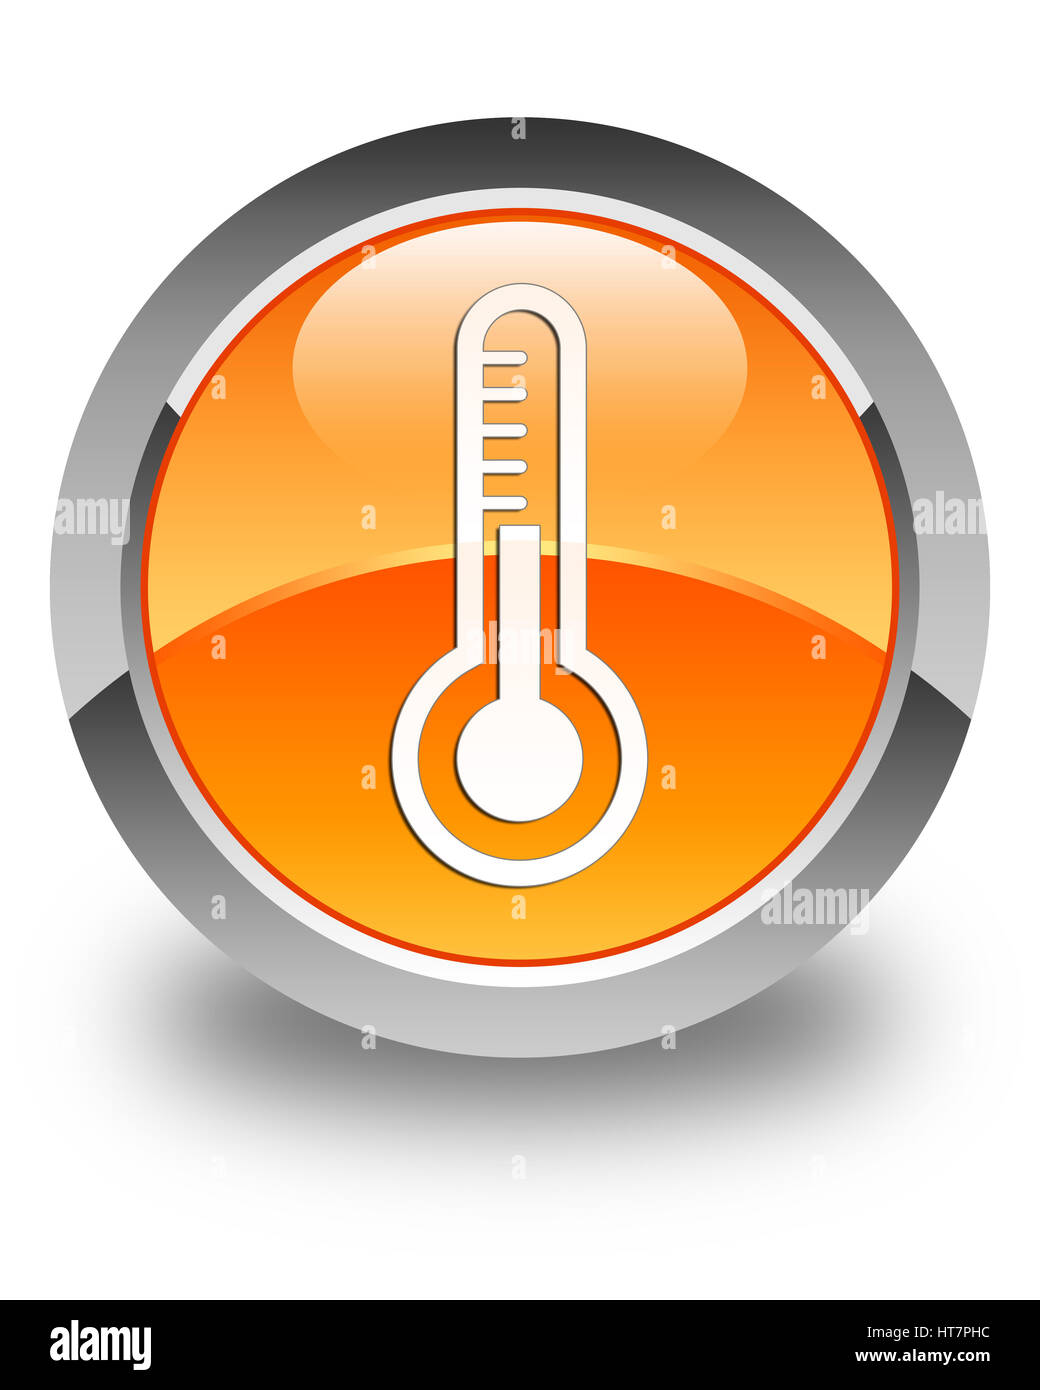 Thermometer icon isolated on glossy orange round button abstract illustration Stock Photo